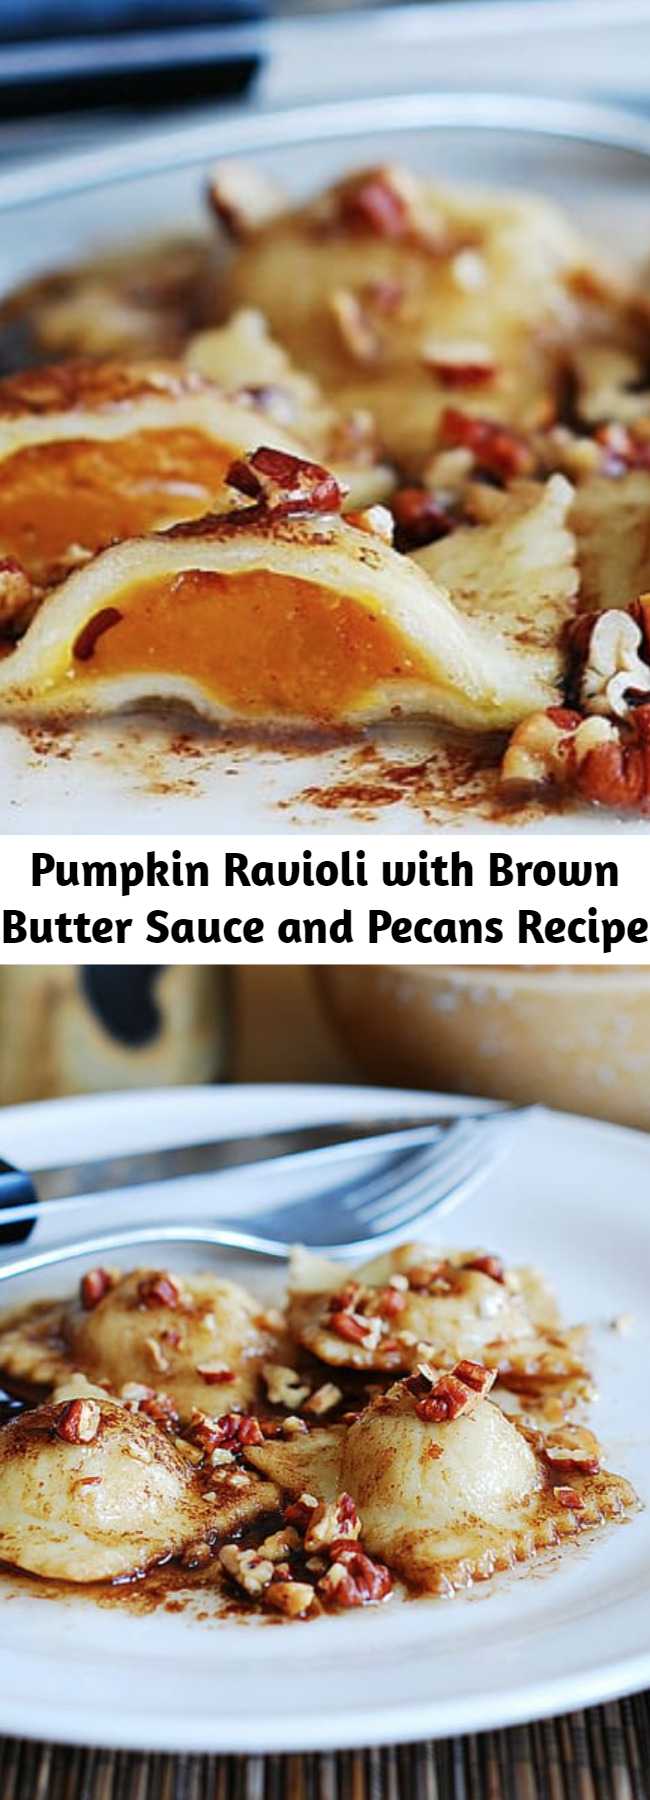 Pumpkin Ravioli with Brown Butter Sauce and Pecans Recipe - Pumpkin ravioli with brown butter sauce and pecans – everything is made from scratch! Great recipe during the holiday season (Thanksgiving and Christmas) with lots of seasonal ingredients: pumpkin, pecans, nutmeg.